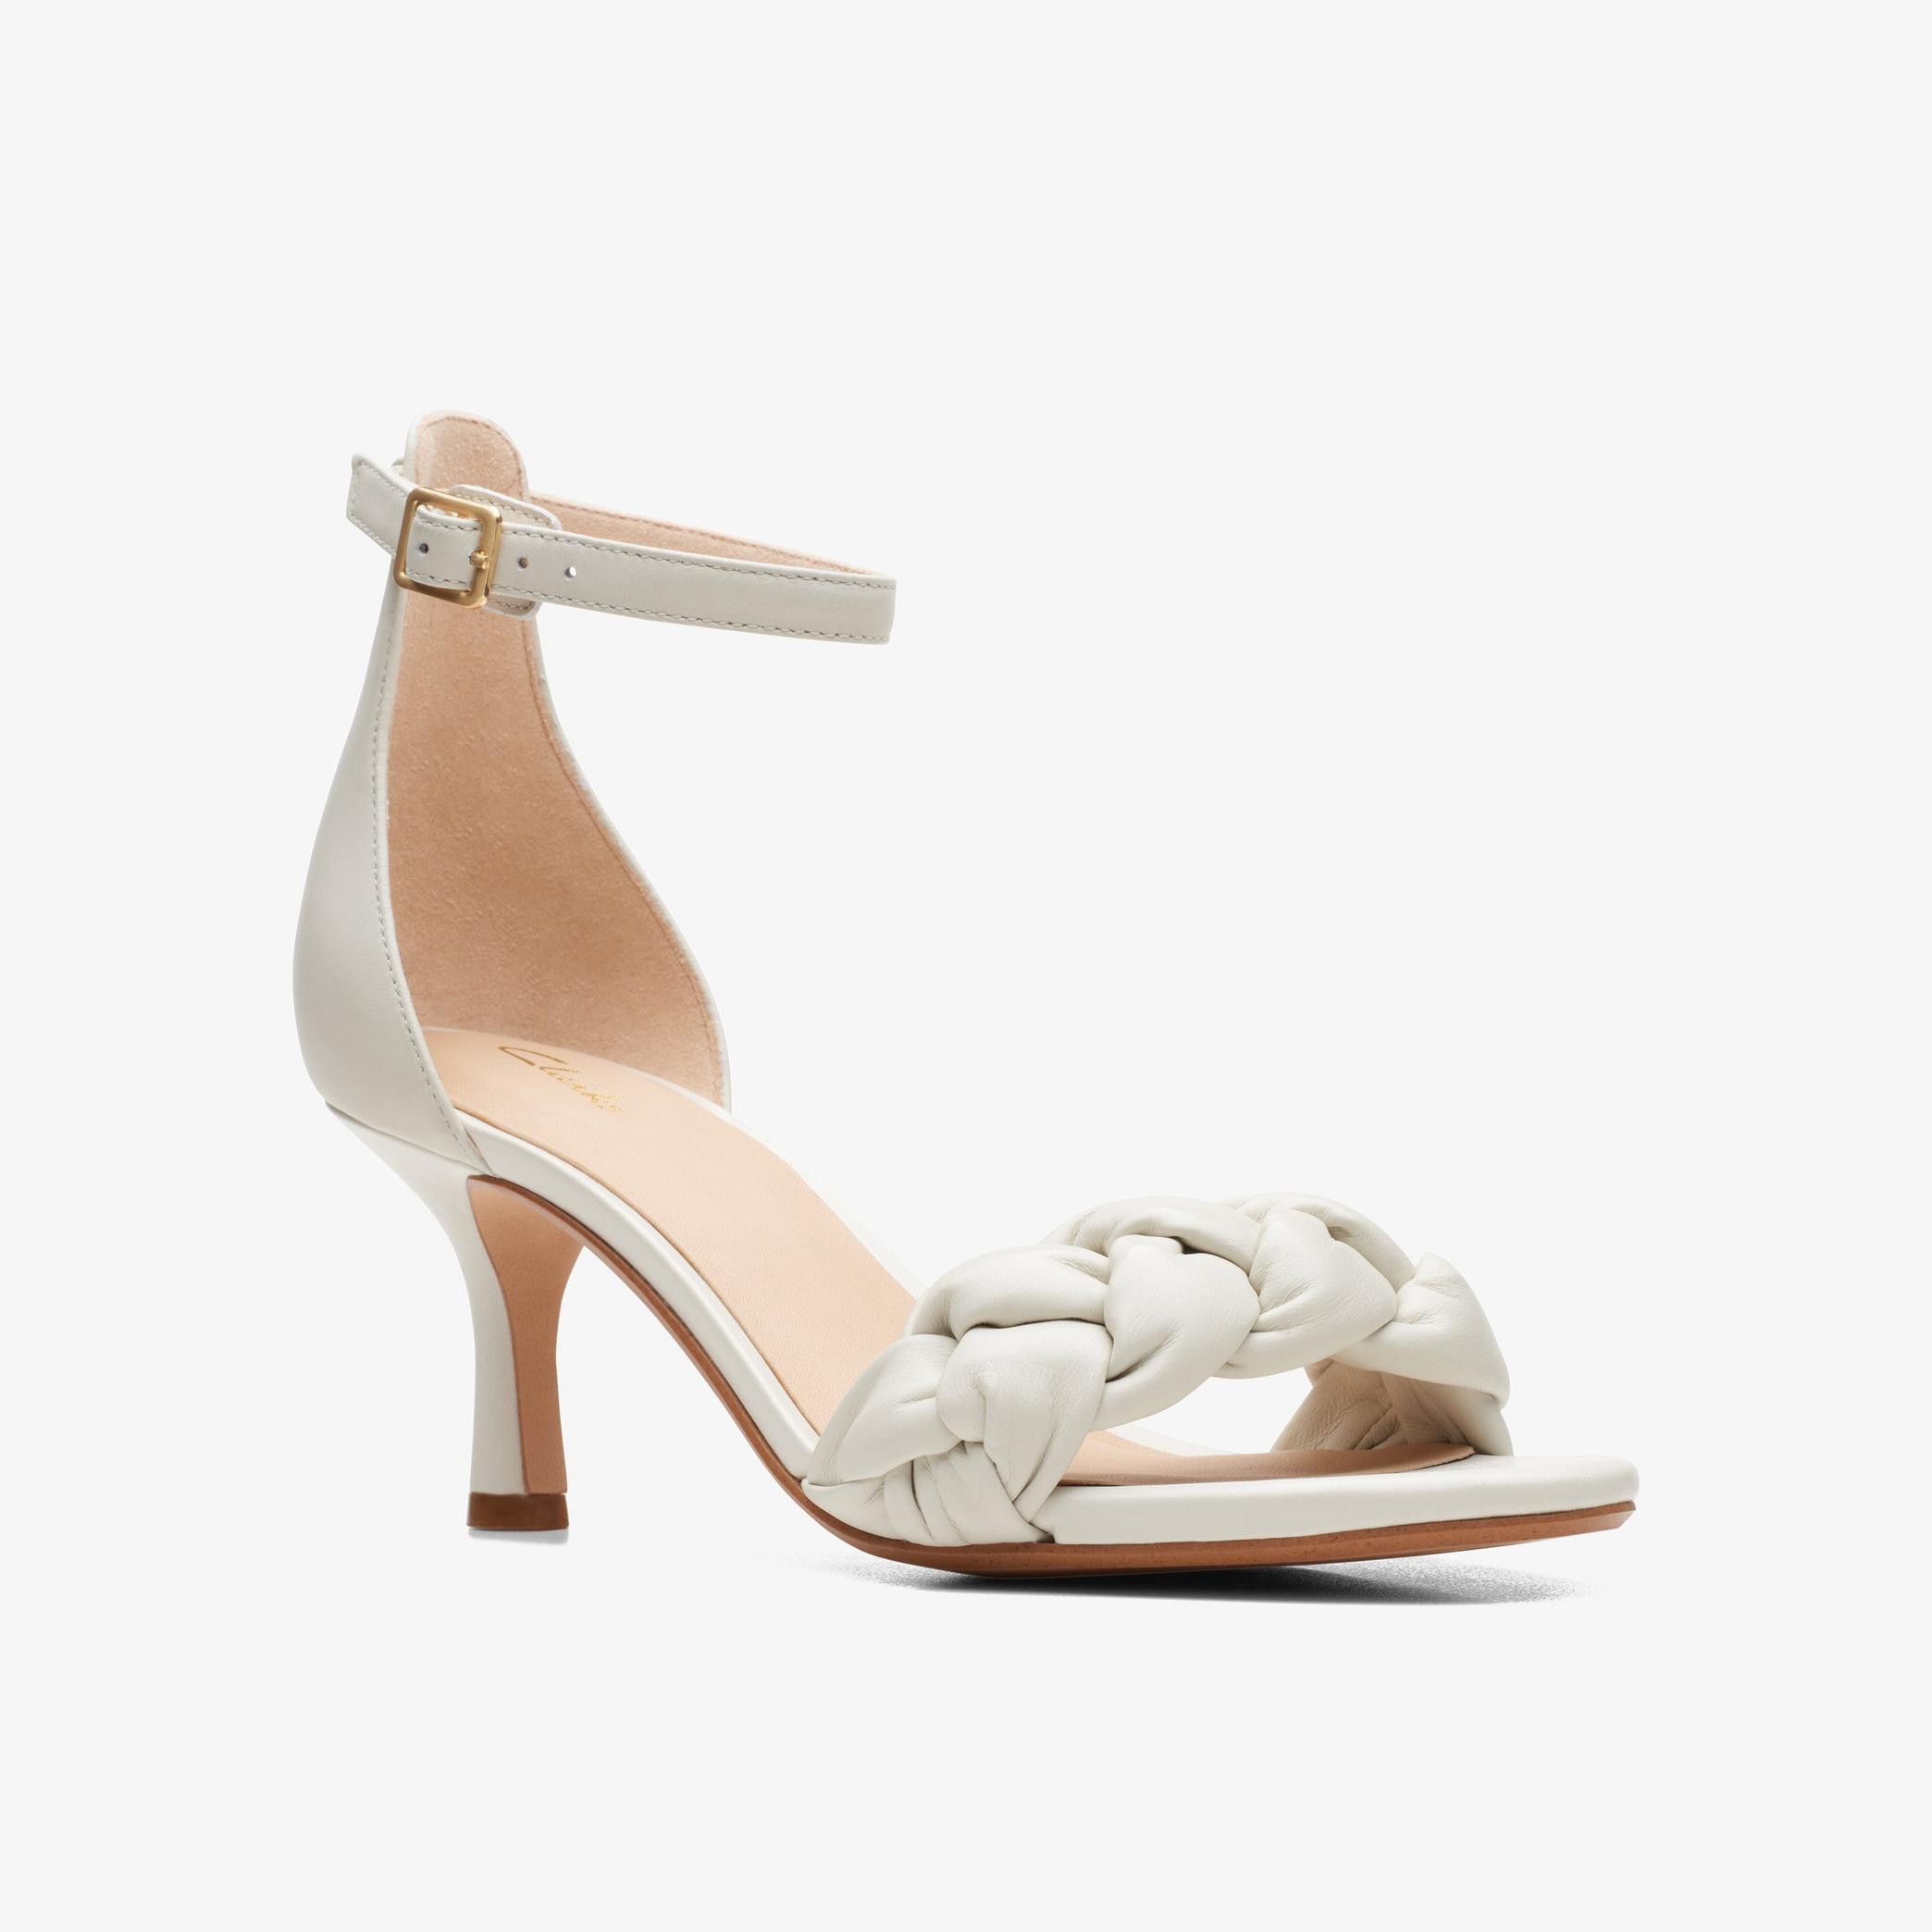 Amali Sandal White Leather Strappy Sandals, view 3 of 6